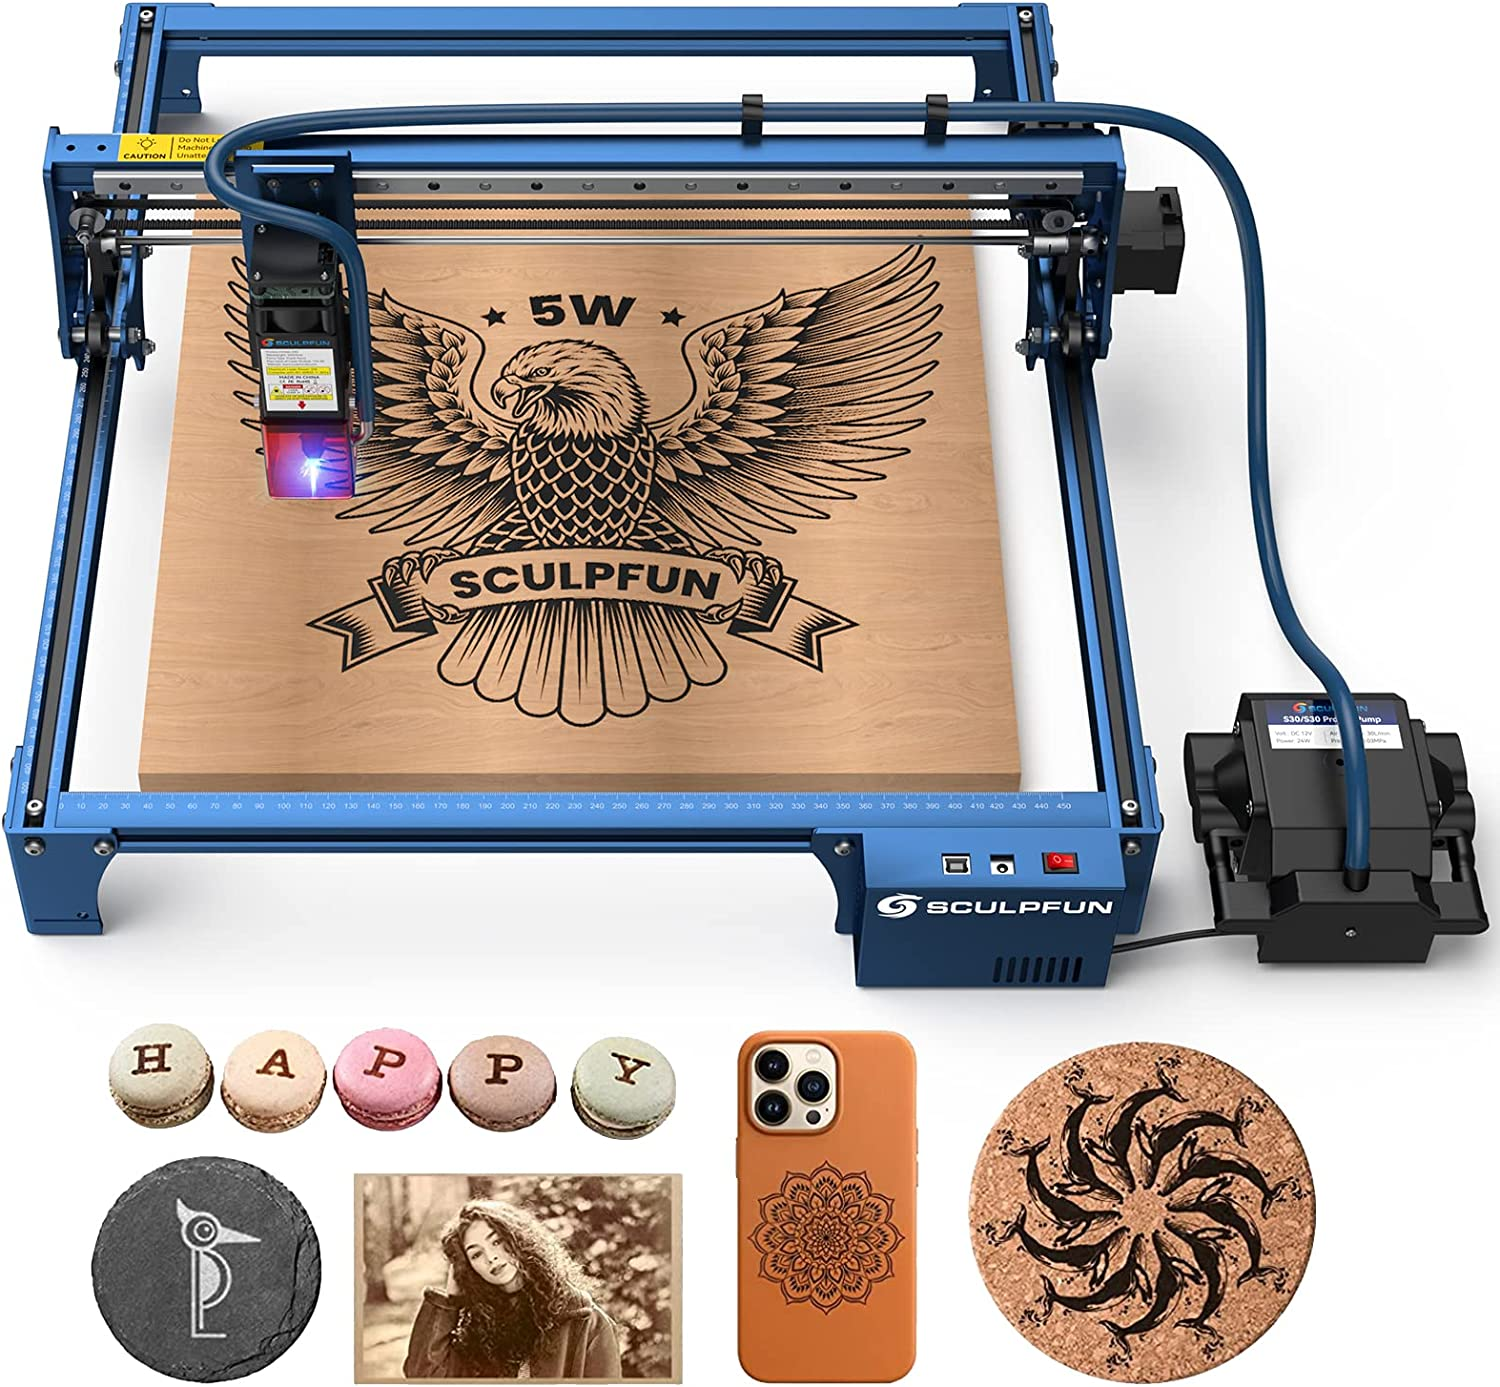 Portable Laser Air Assist Pump Kit for Laser Engraver & Cutter - Two Trees